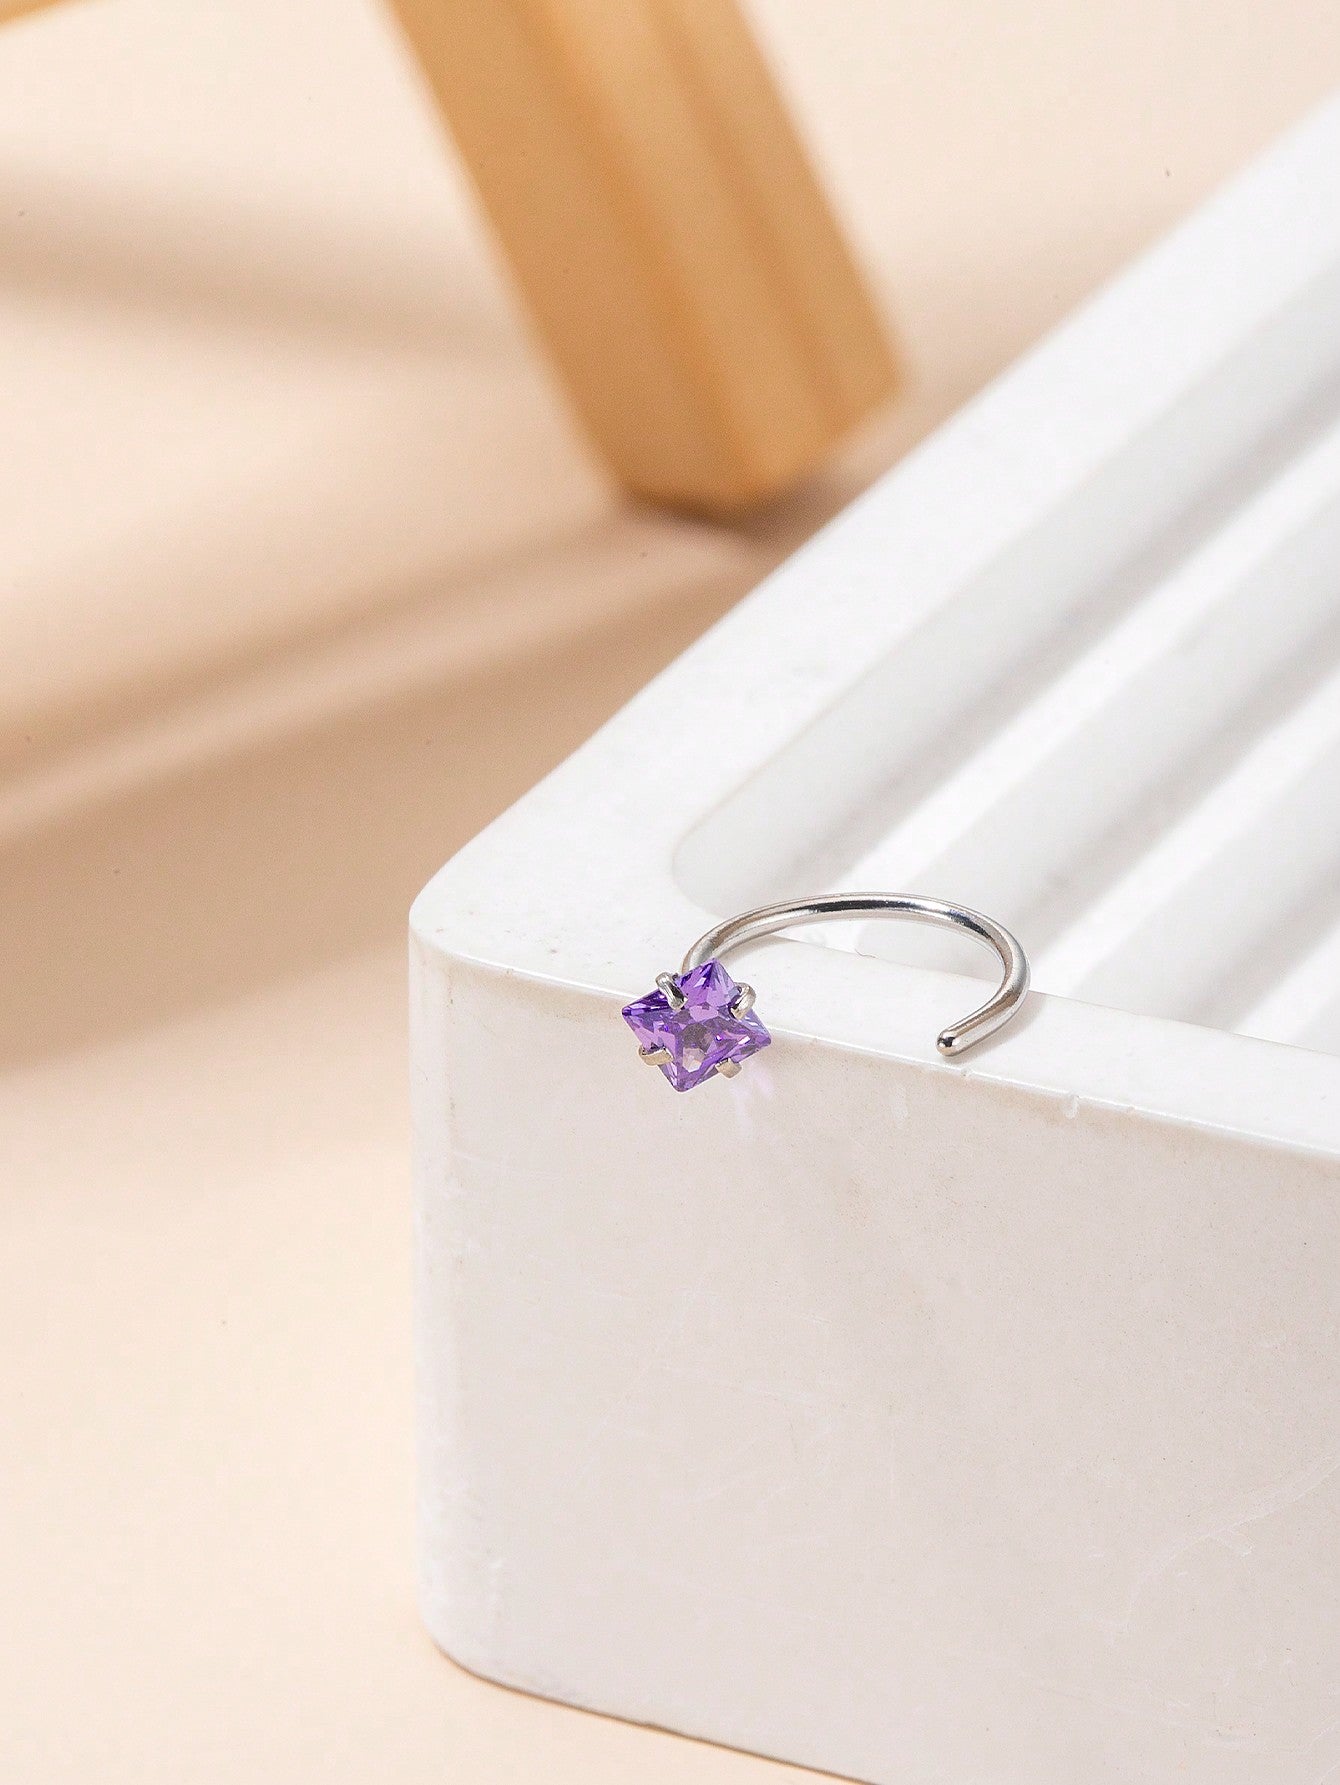 Silver Rhinestone Charming & Exquisite Square Shaped Stainless Steel Pierced Nose Ring 🔥